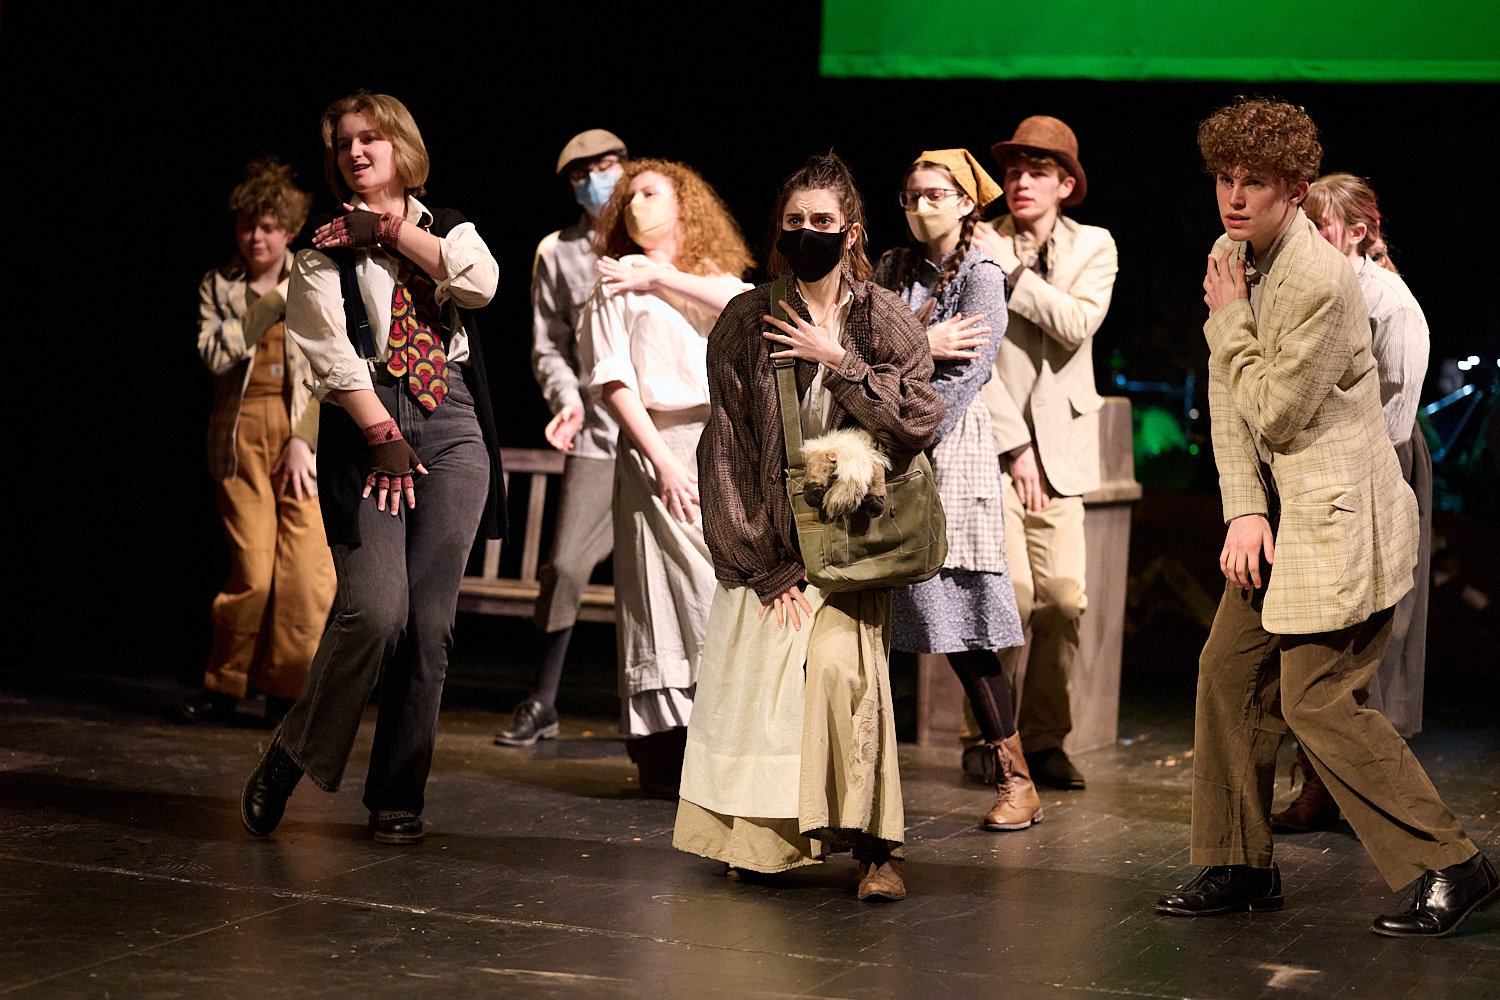  SEWICKLEY, PA, USA - MARCH 2ND 2022: High School students of Sewickley Academy are performing in an annual musical show “Urinetown” running on March 3rd-5th 2022. Alexandra Cordle 